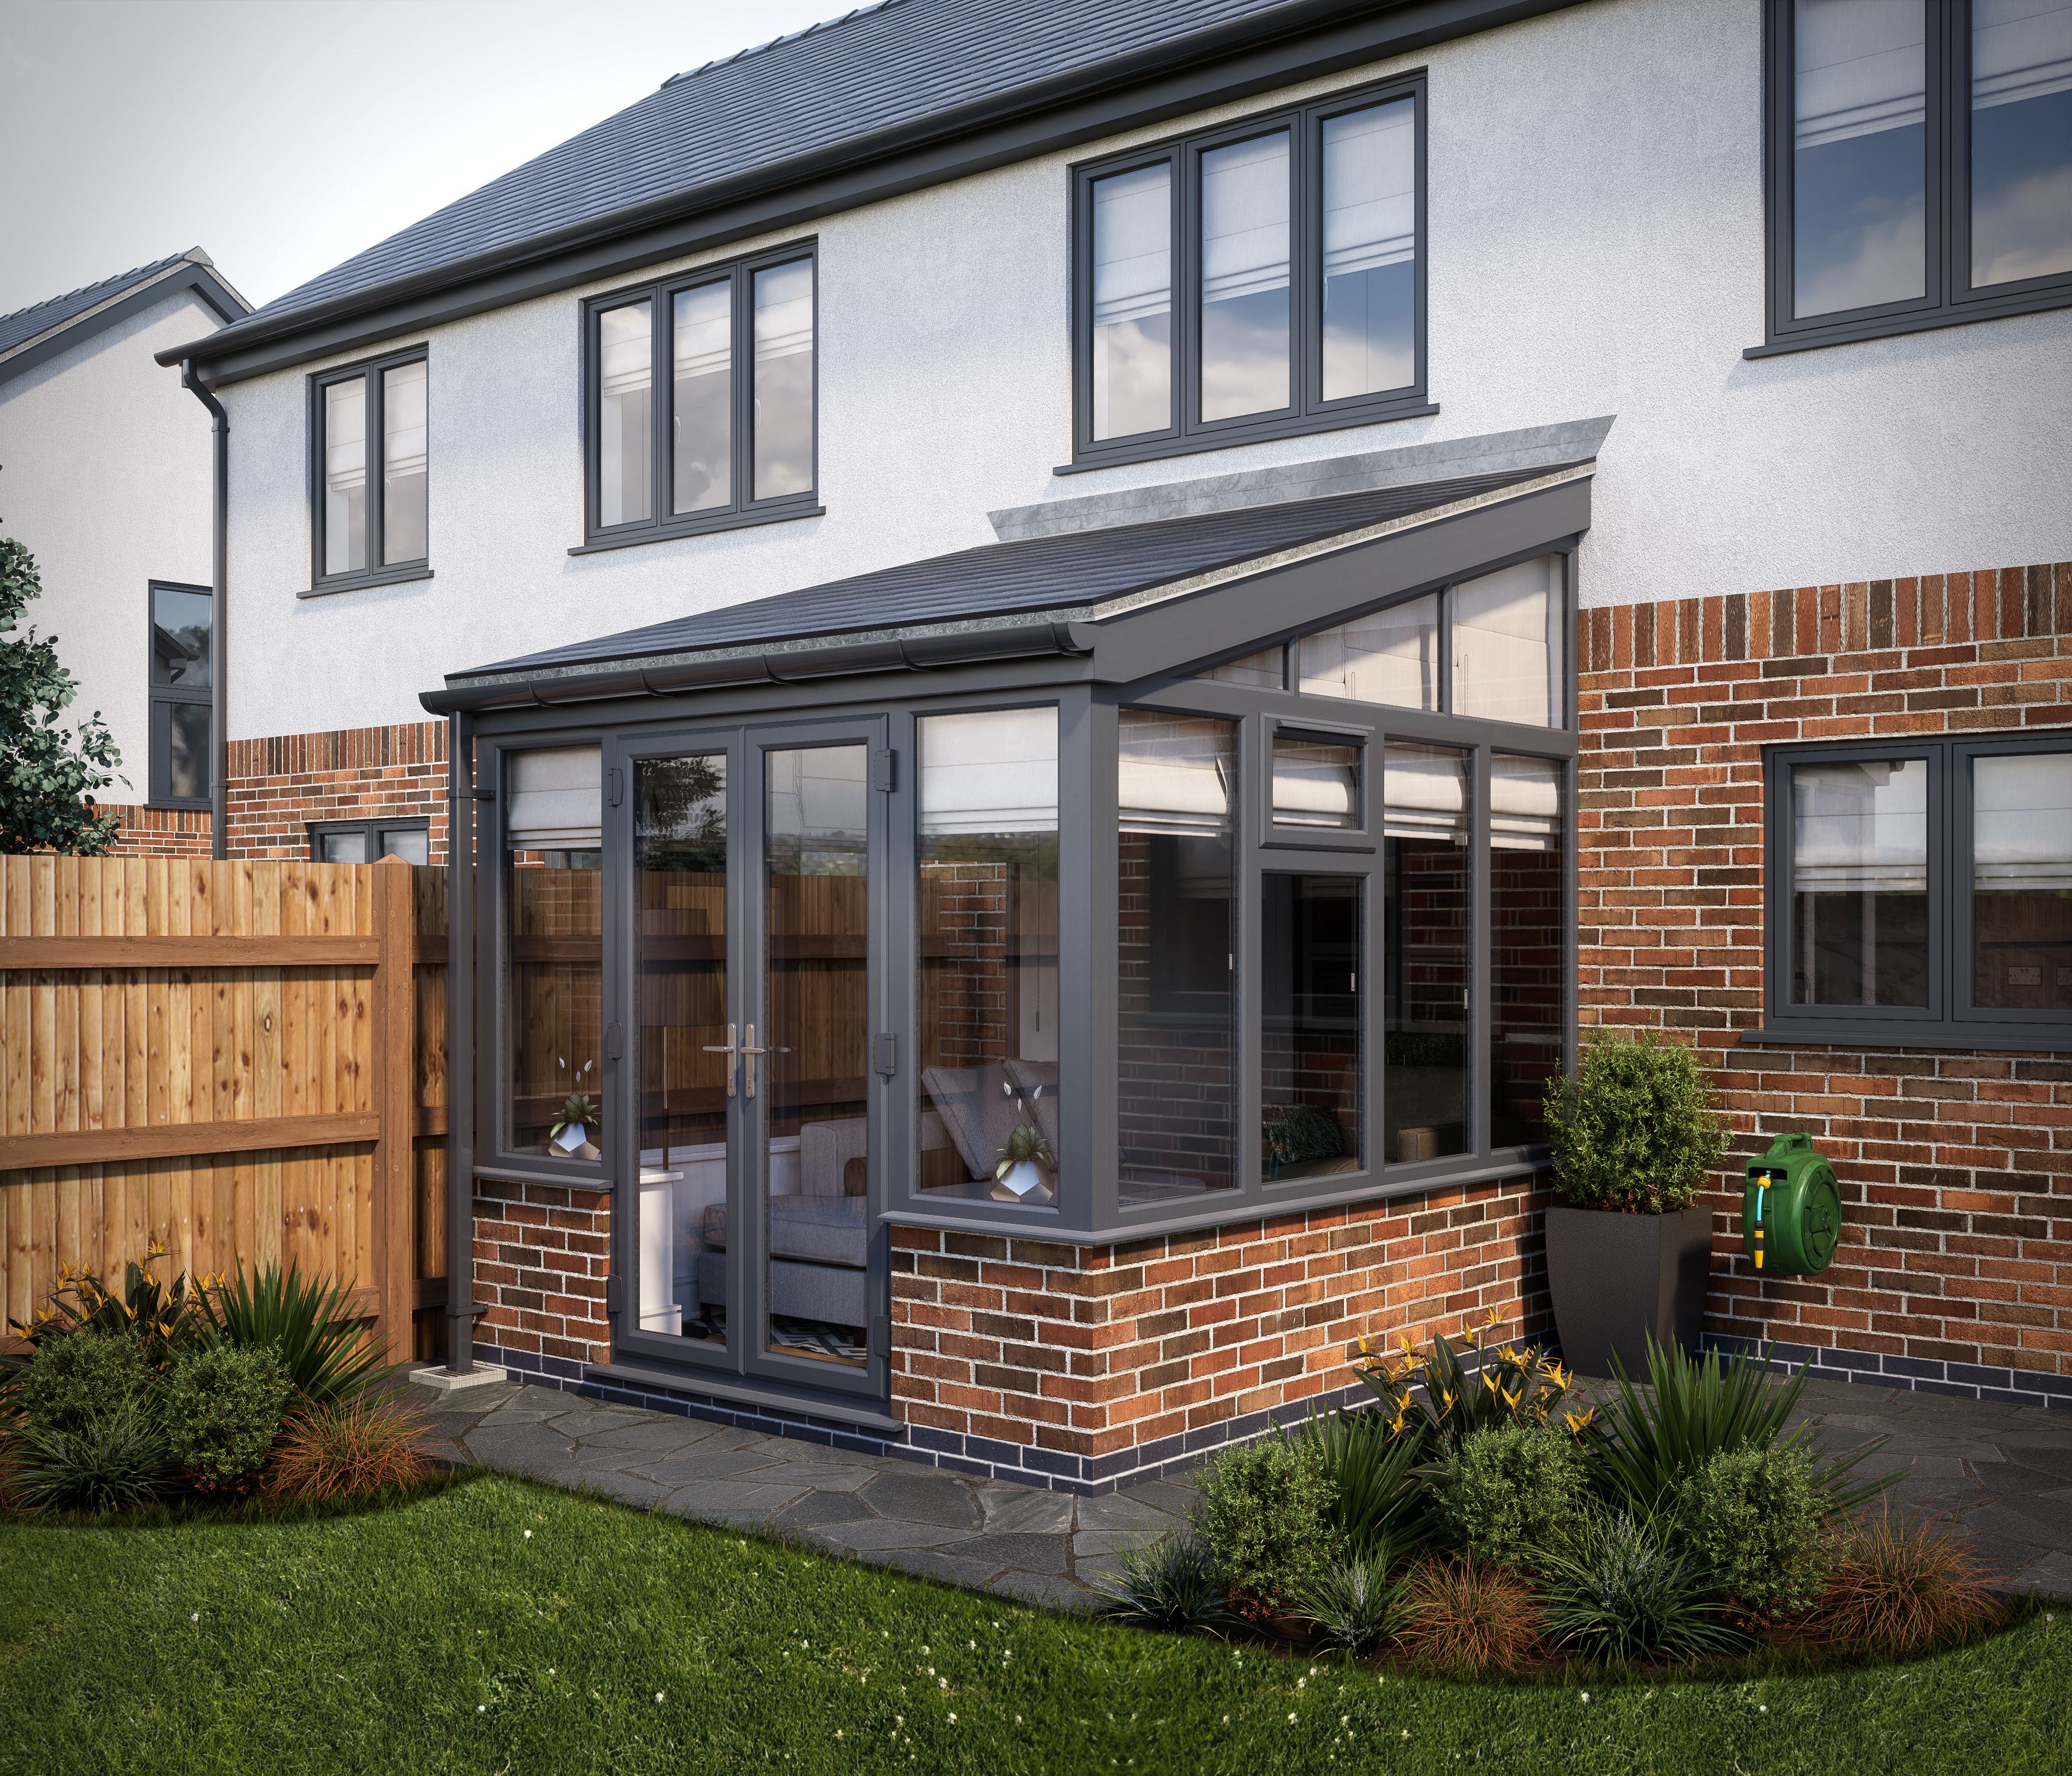 Image of SOLid Roof Lean to Conservatory Grey Frames Dwarf Wall with Titanium Grey Tiles - 13 x 10ft